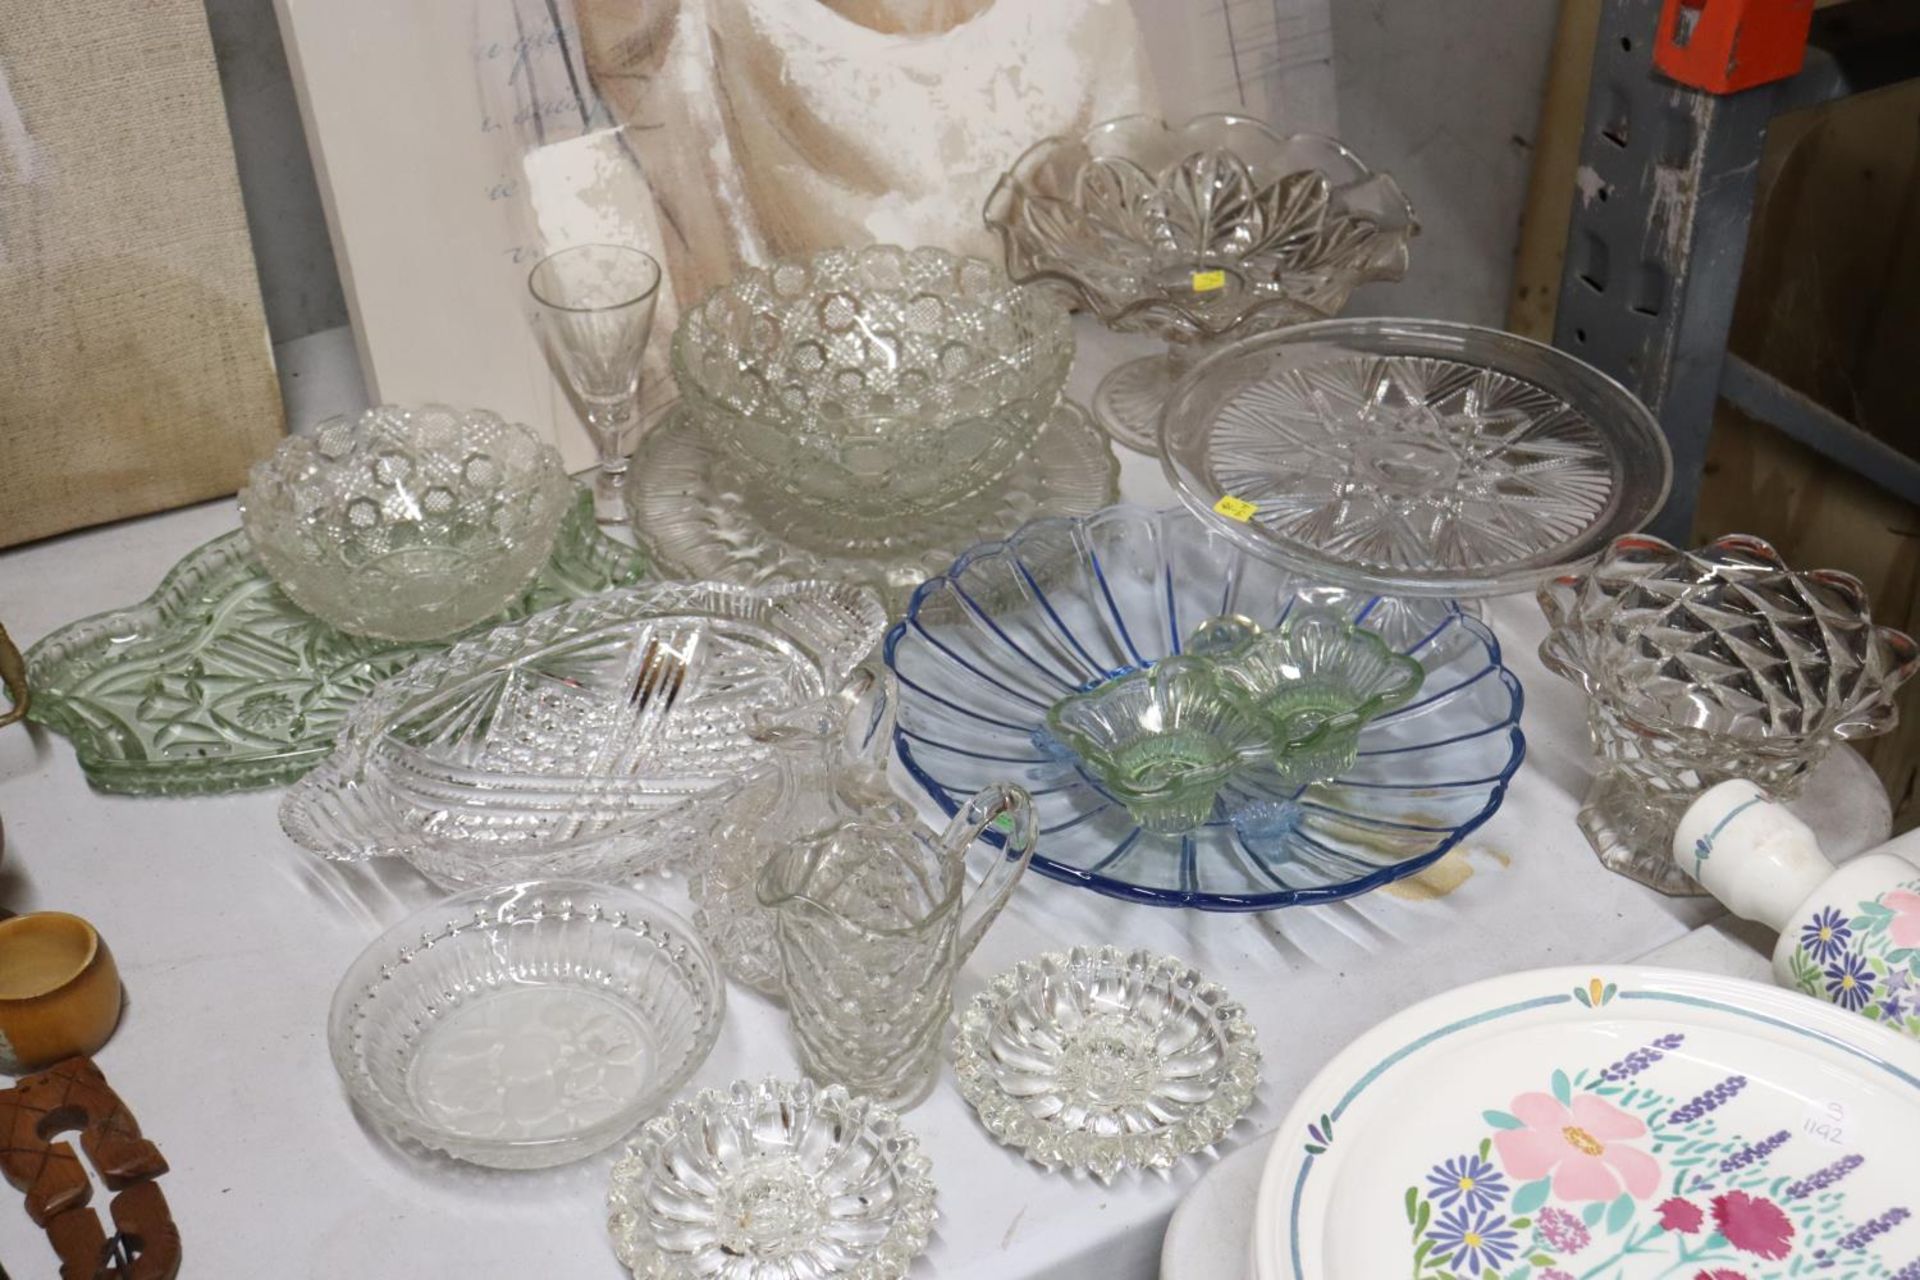 A LARGE QUANTITY OF GLASSWARE TO INCLUDE BOWLS, CAKE STANDS, JUGS, ETC